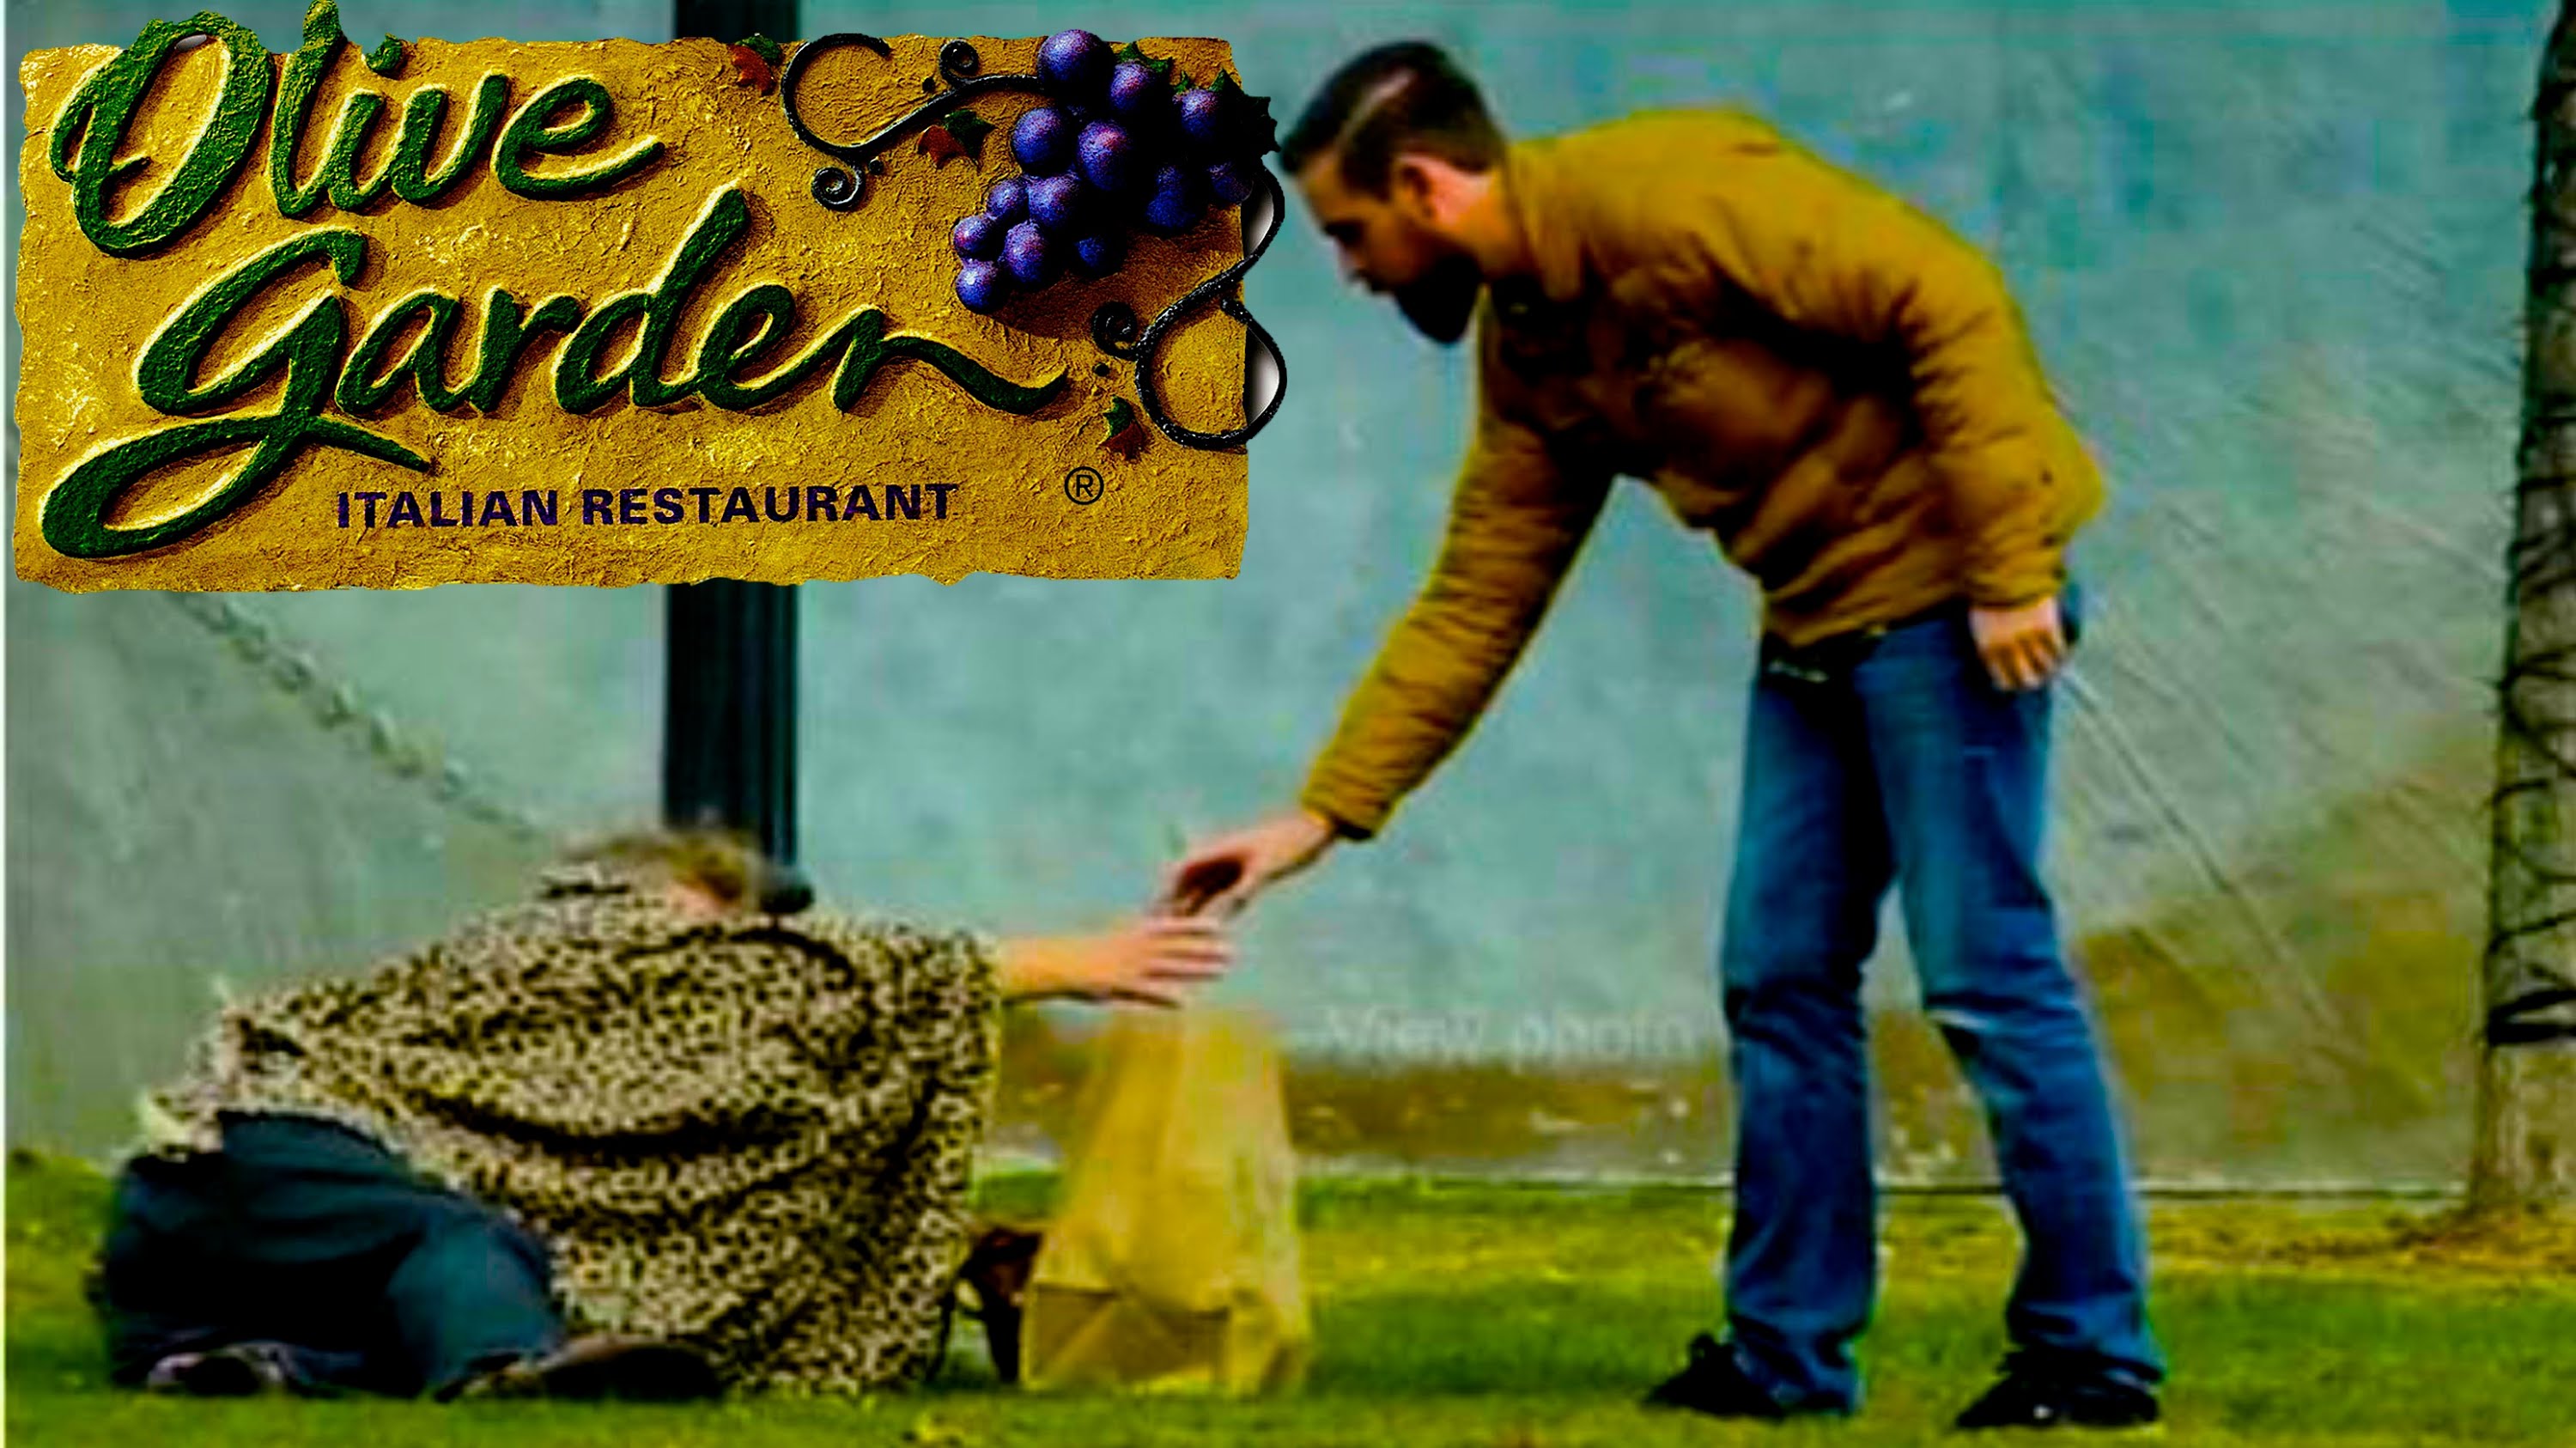 Olive Garden Feeds The Homeless As A Marketing Stunt